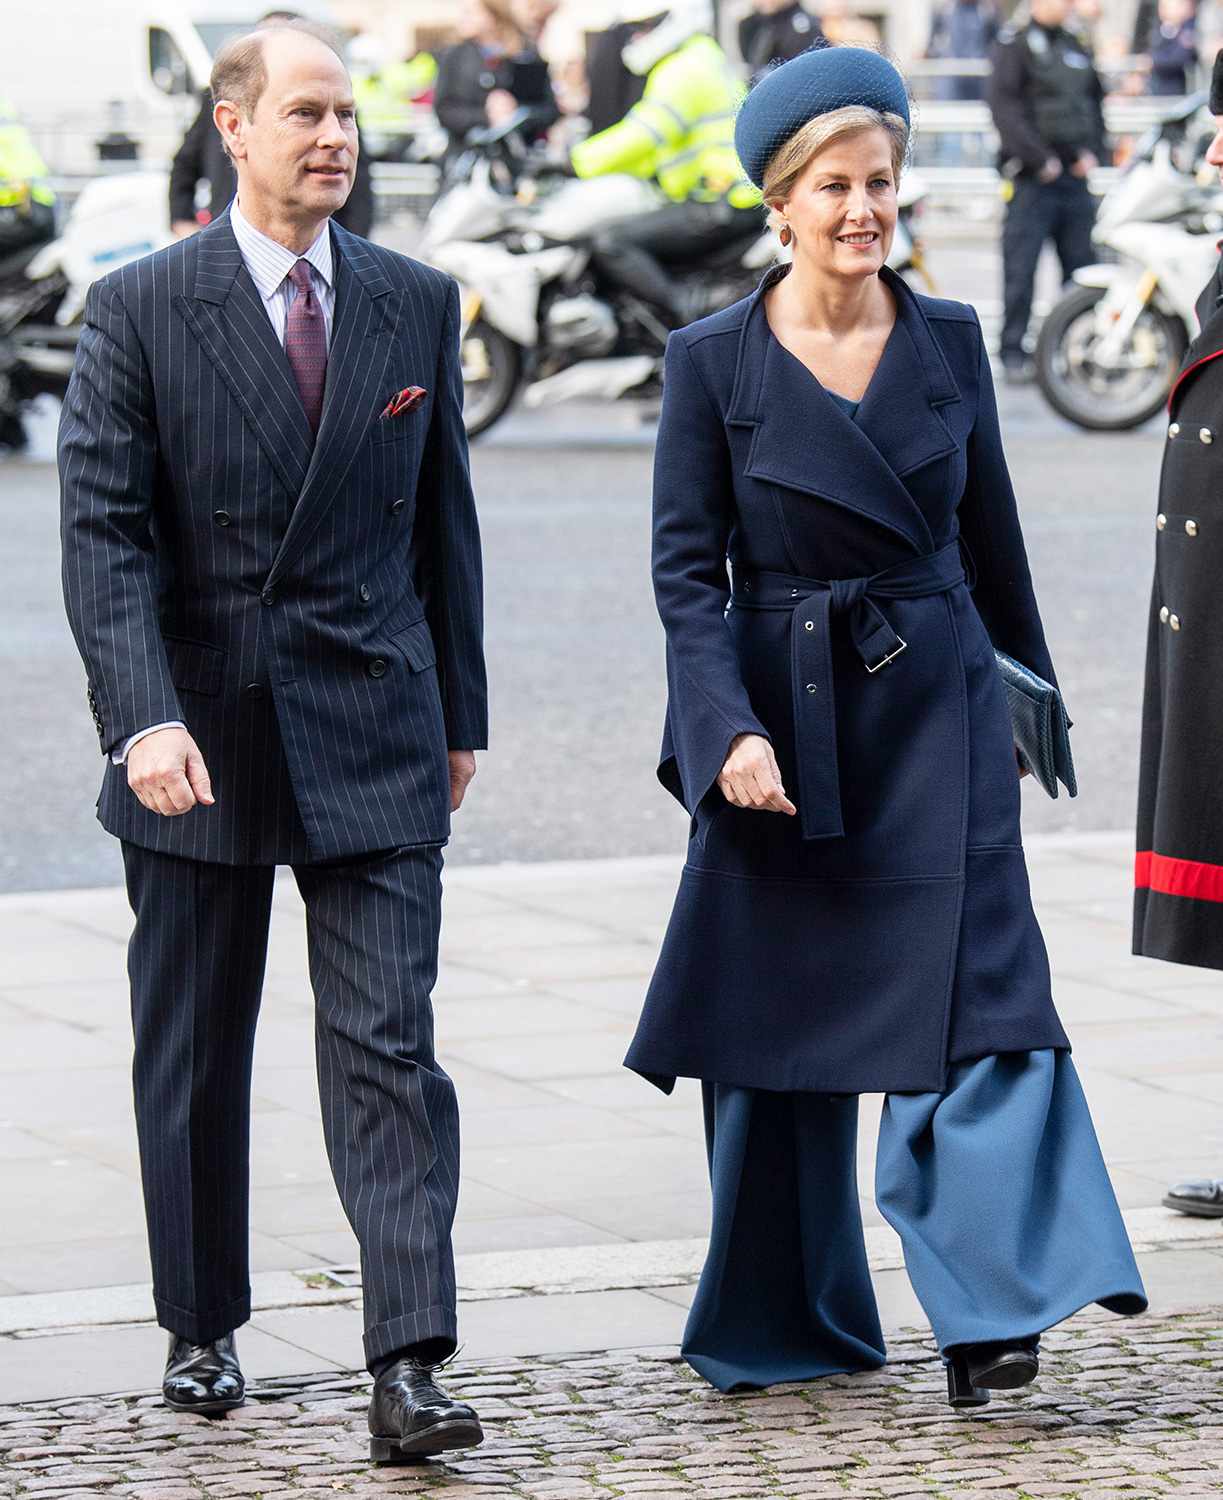 Sophie, Countess of Wessex and Prince Edward, Earl of Wessex attend a Service of Thanksgiving for the life and work of Sir Donald Gosling at Westminster Abbey on December 11, 2019 in London, England